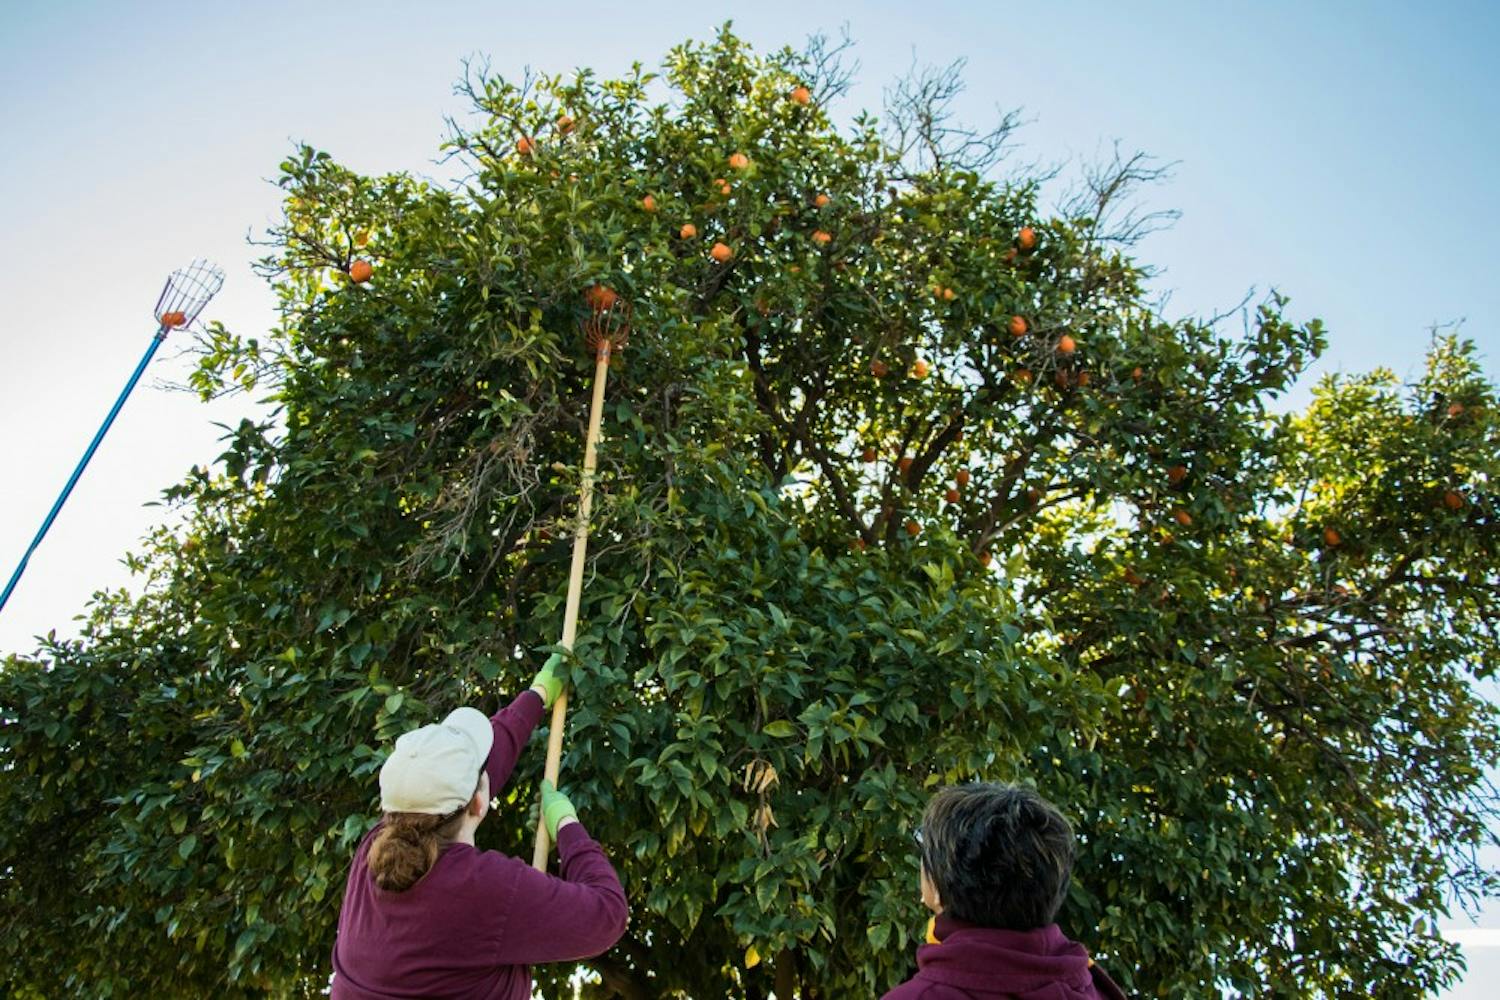 Volunteers contribute to the annual seville orange harvest on the Tempe Campus on Feb. 4, 2017.